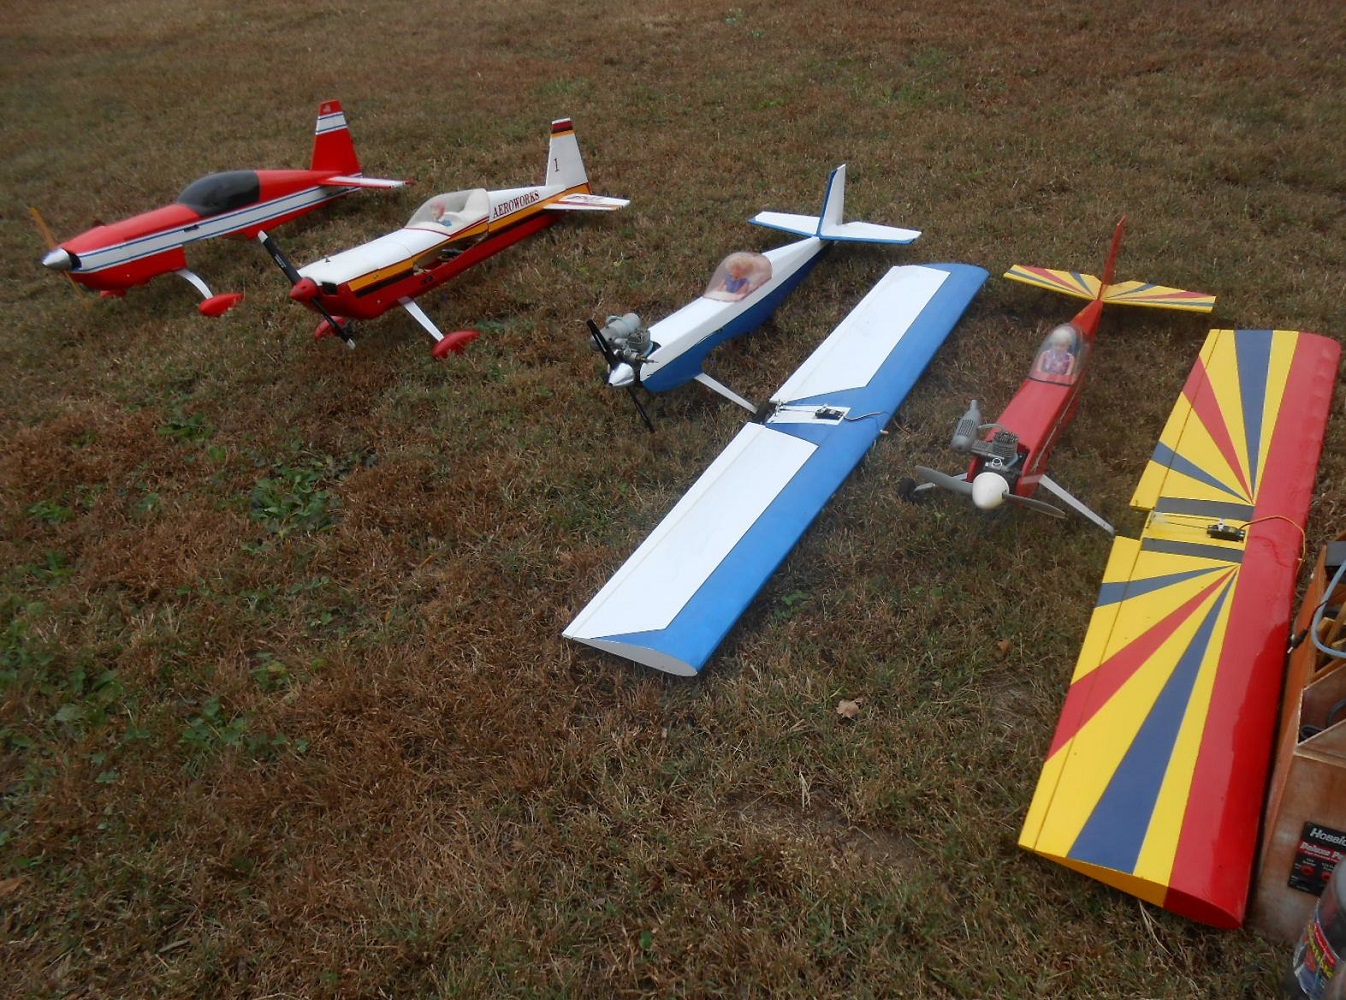 Airplanes to buy at Buder park